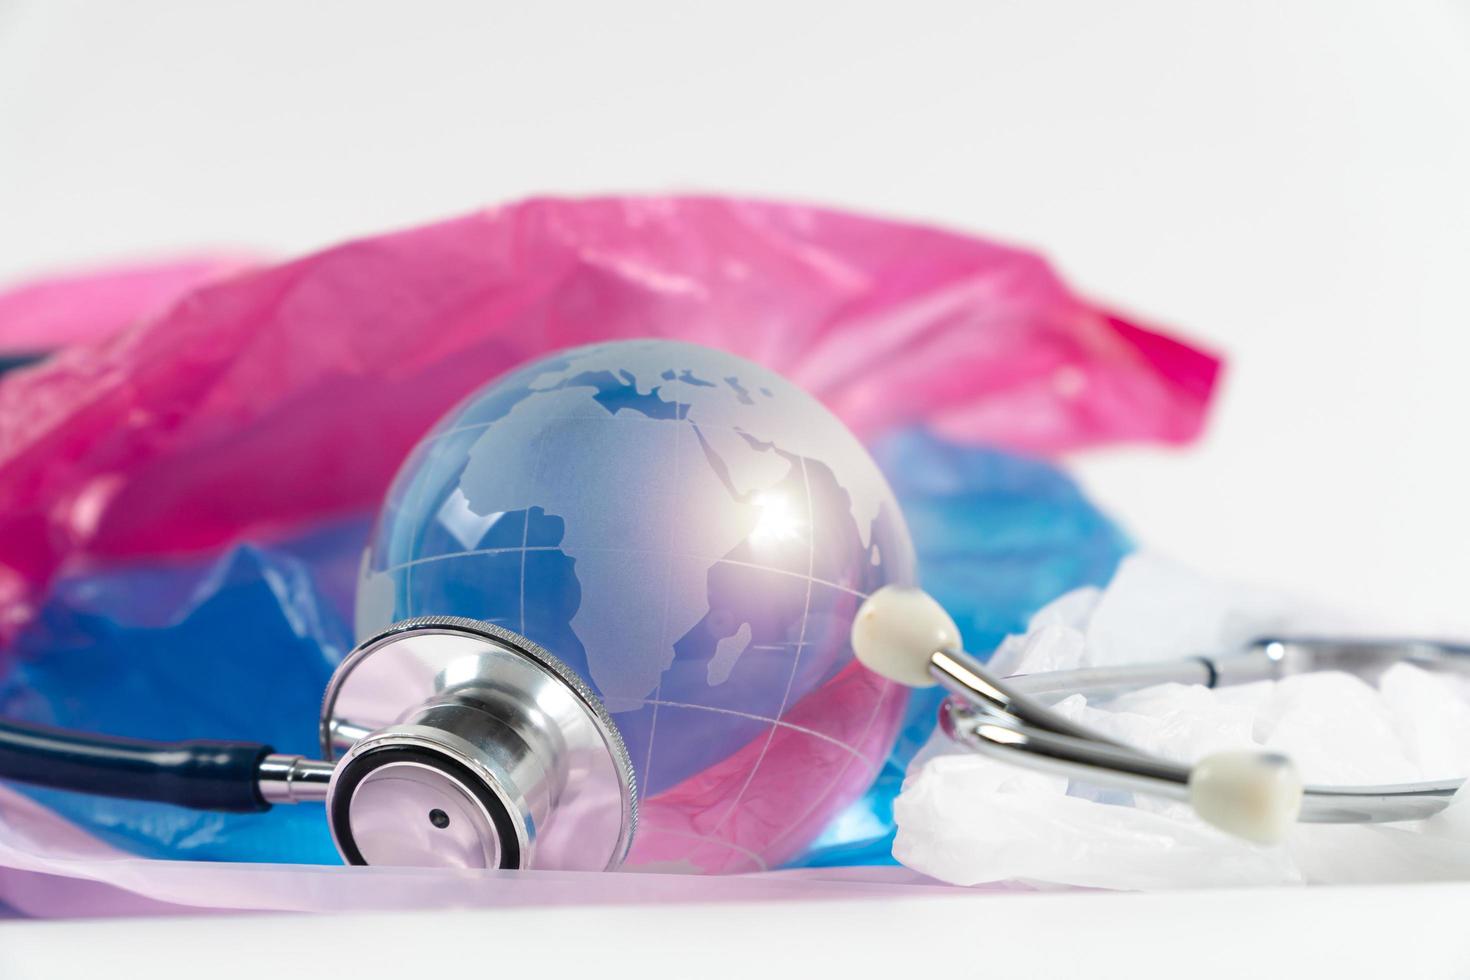 Crystal globe and Stethoscope on plastic bag. Plastic waste overflows the world, The world is sick, Global Warming and Climate Change concept. photo